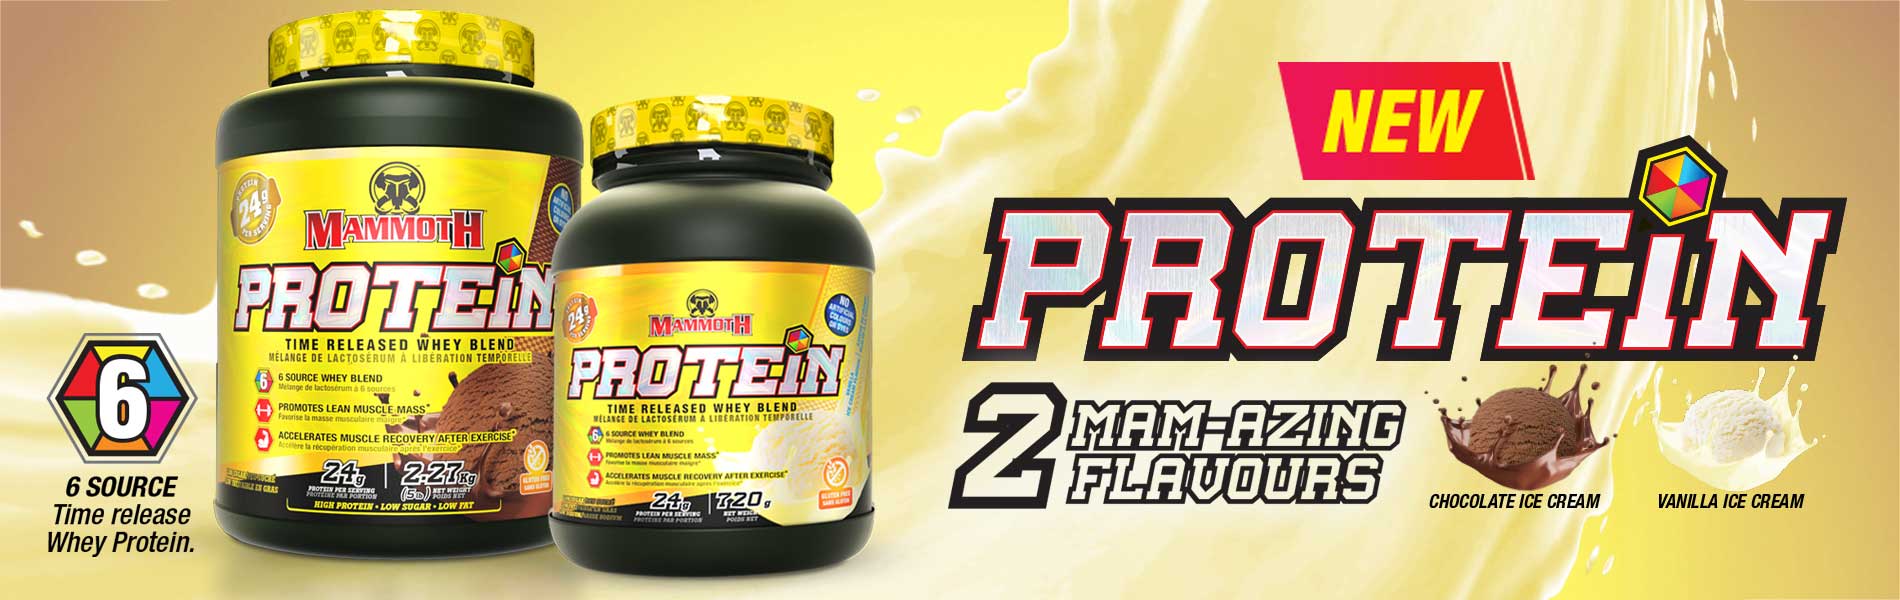 Mammoth PROTEIN AVAILABLE NOW